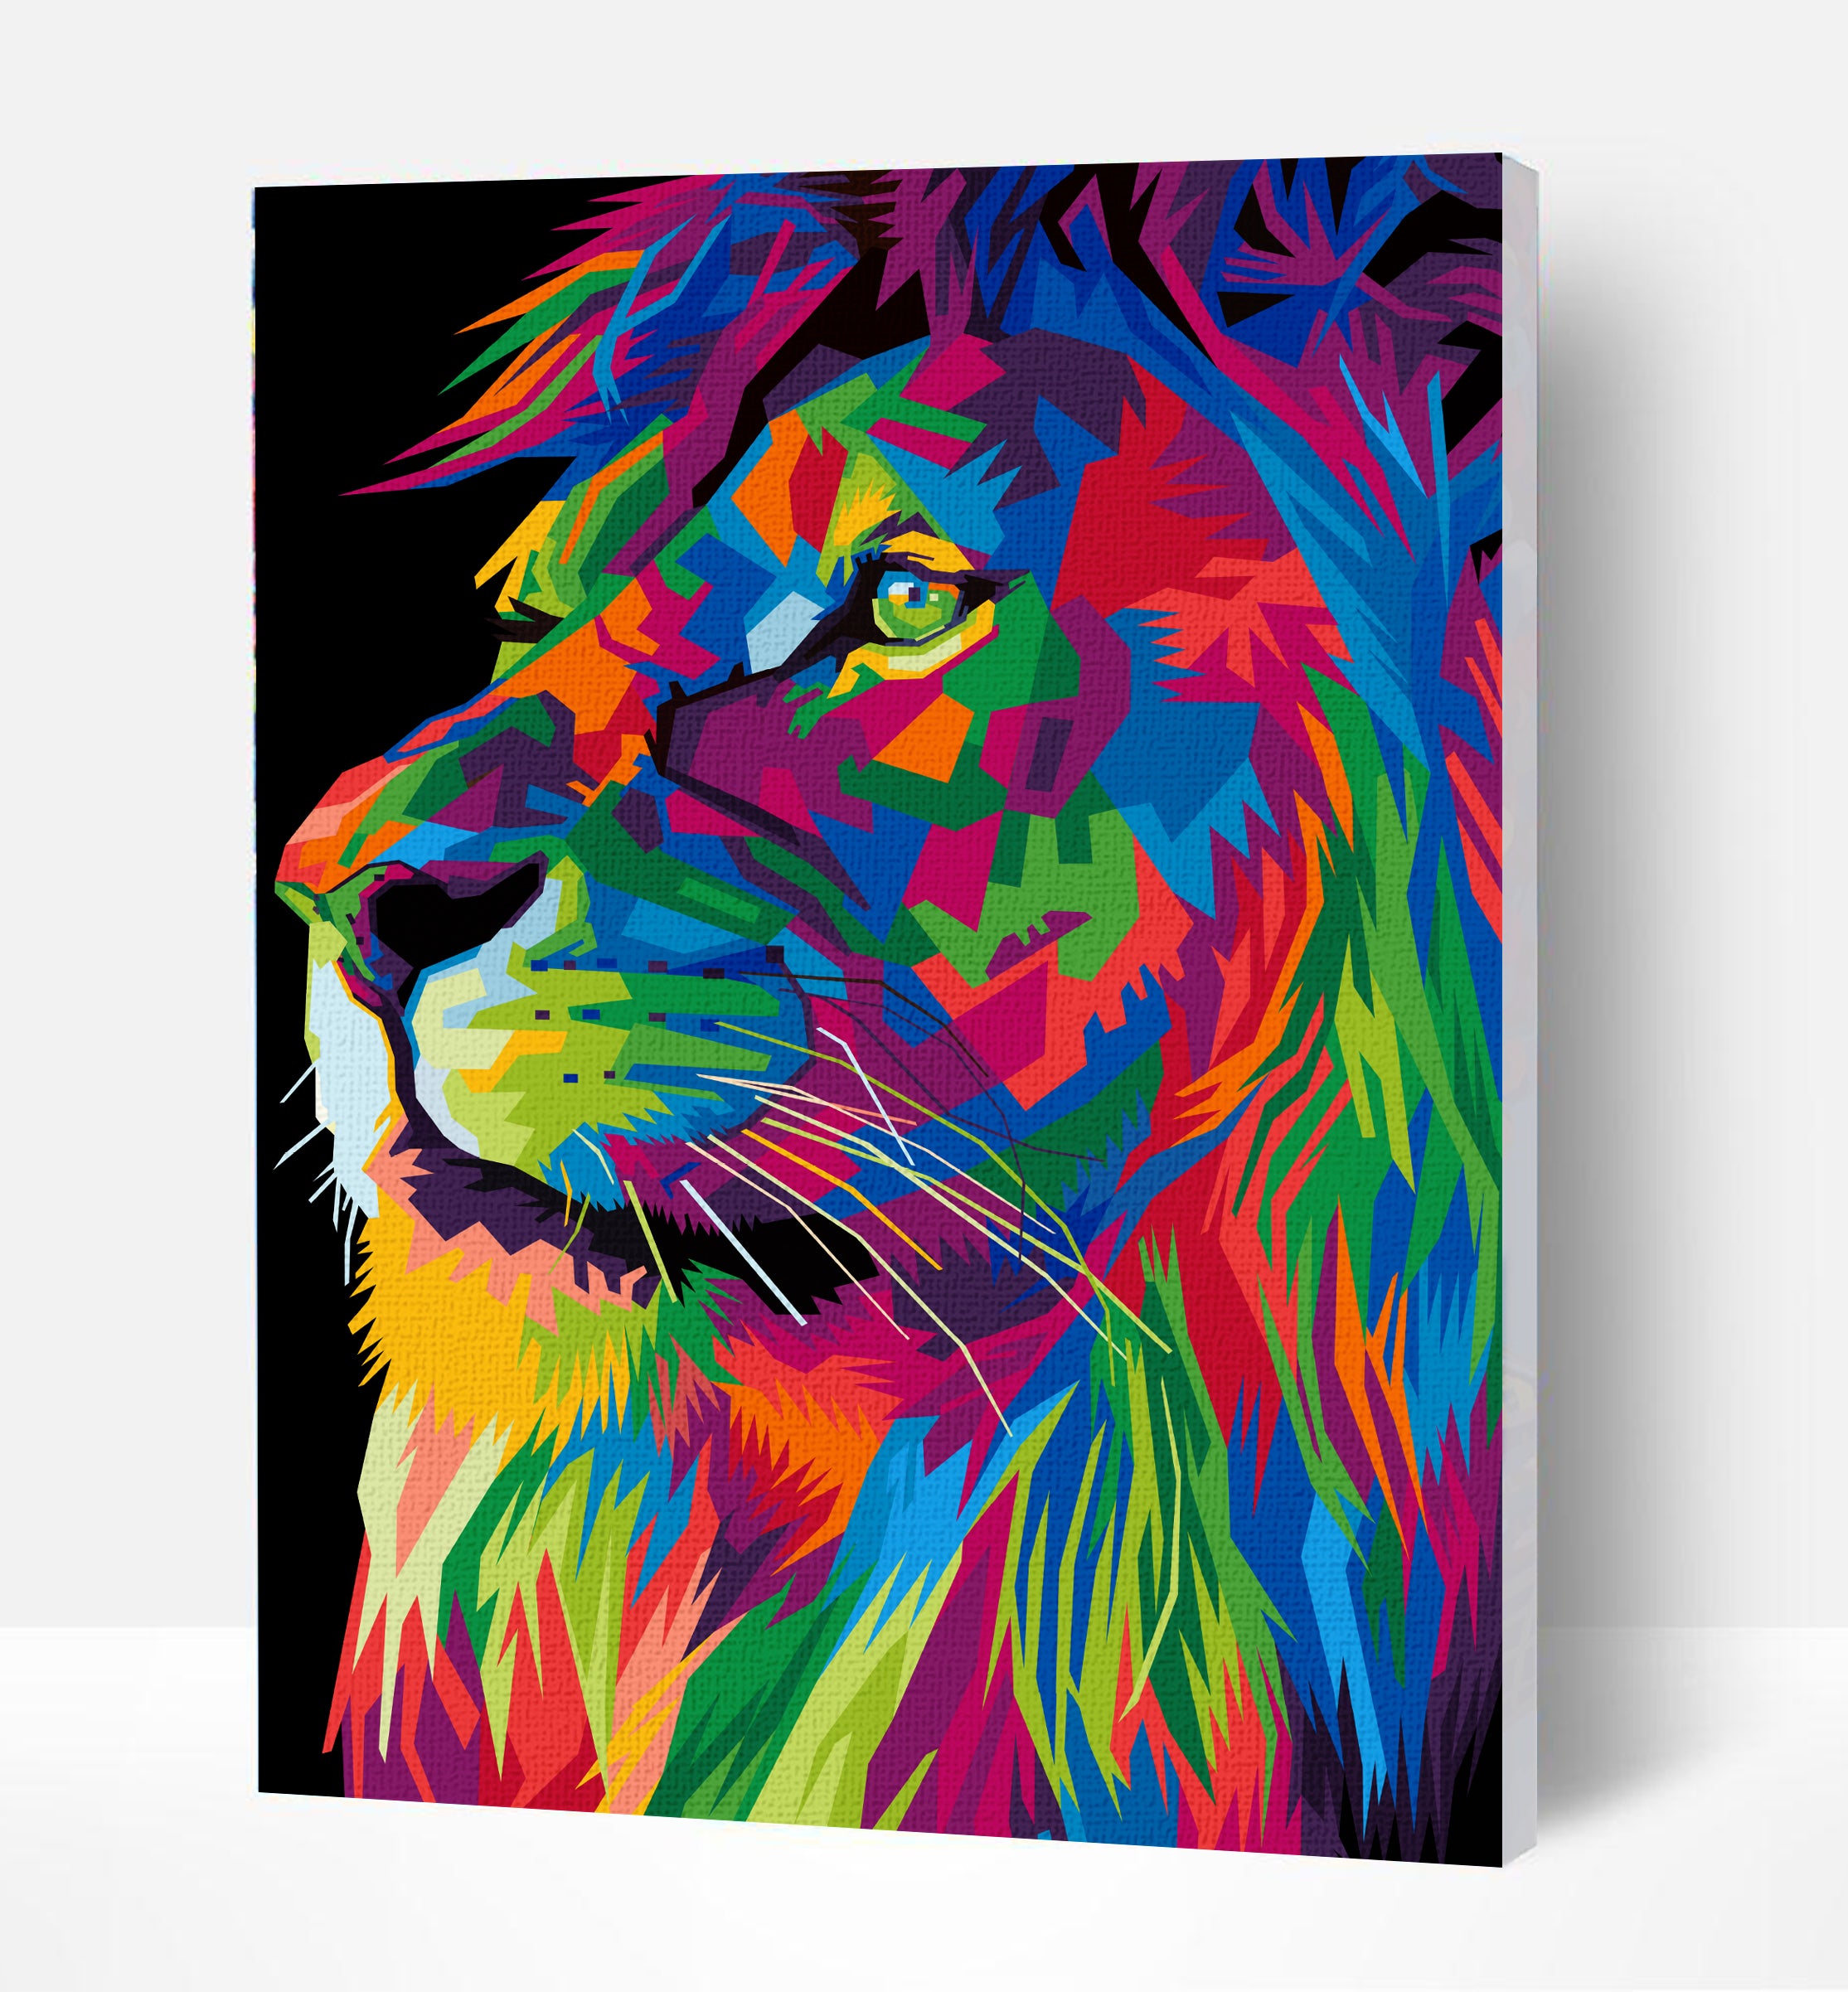 Lion paint by number, Lion painting, Lion painting for kids, Lion painting easy, Lion jungle animal painting set, washable acrylic paints, Cat gifts for girls, paint by number on canvas, paint by numbers ready for wall mounting, paint by numbers for kids, paint by numbers for beginners, paint by numbers for children, paint by numbers with frame, framed paint by numbers, lion gifts for girls, lion toys, lion gifts for kid, arts and crafts for adults, fluorescent paints, UV Neon Paints